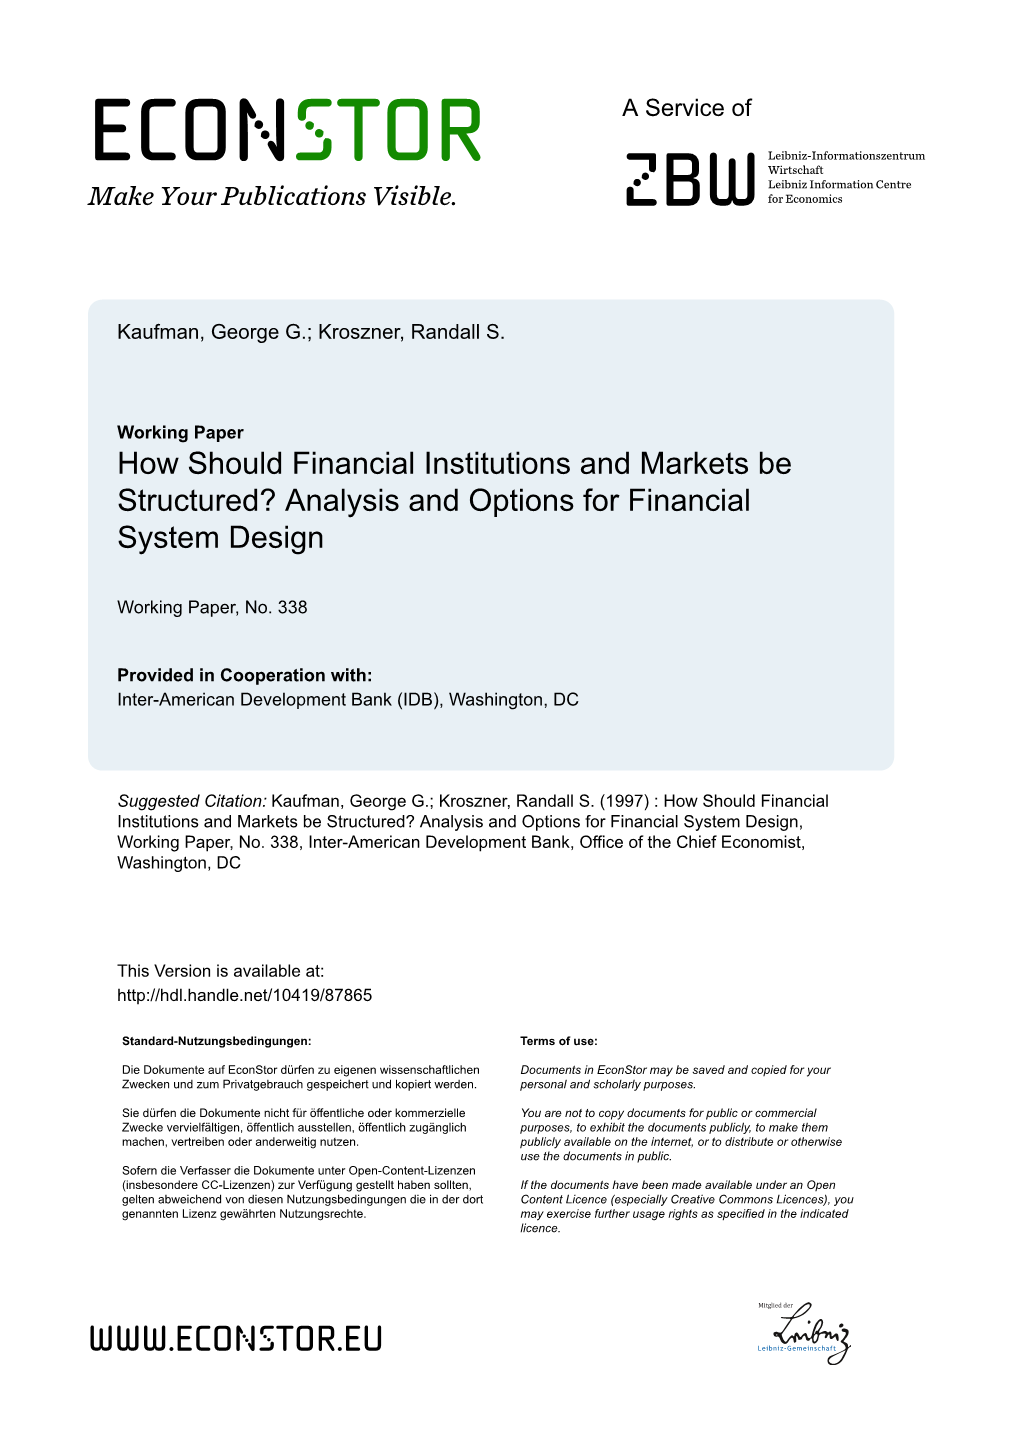 Analysis and Options for Financial System Design